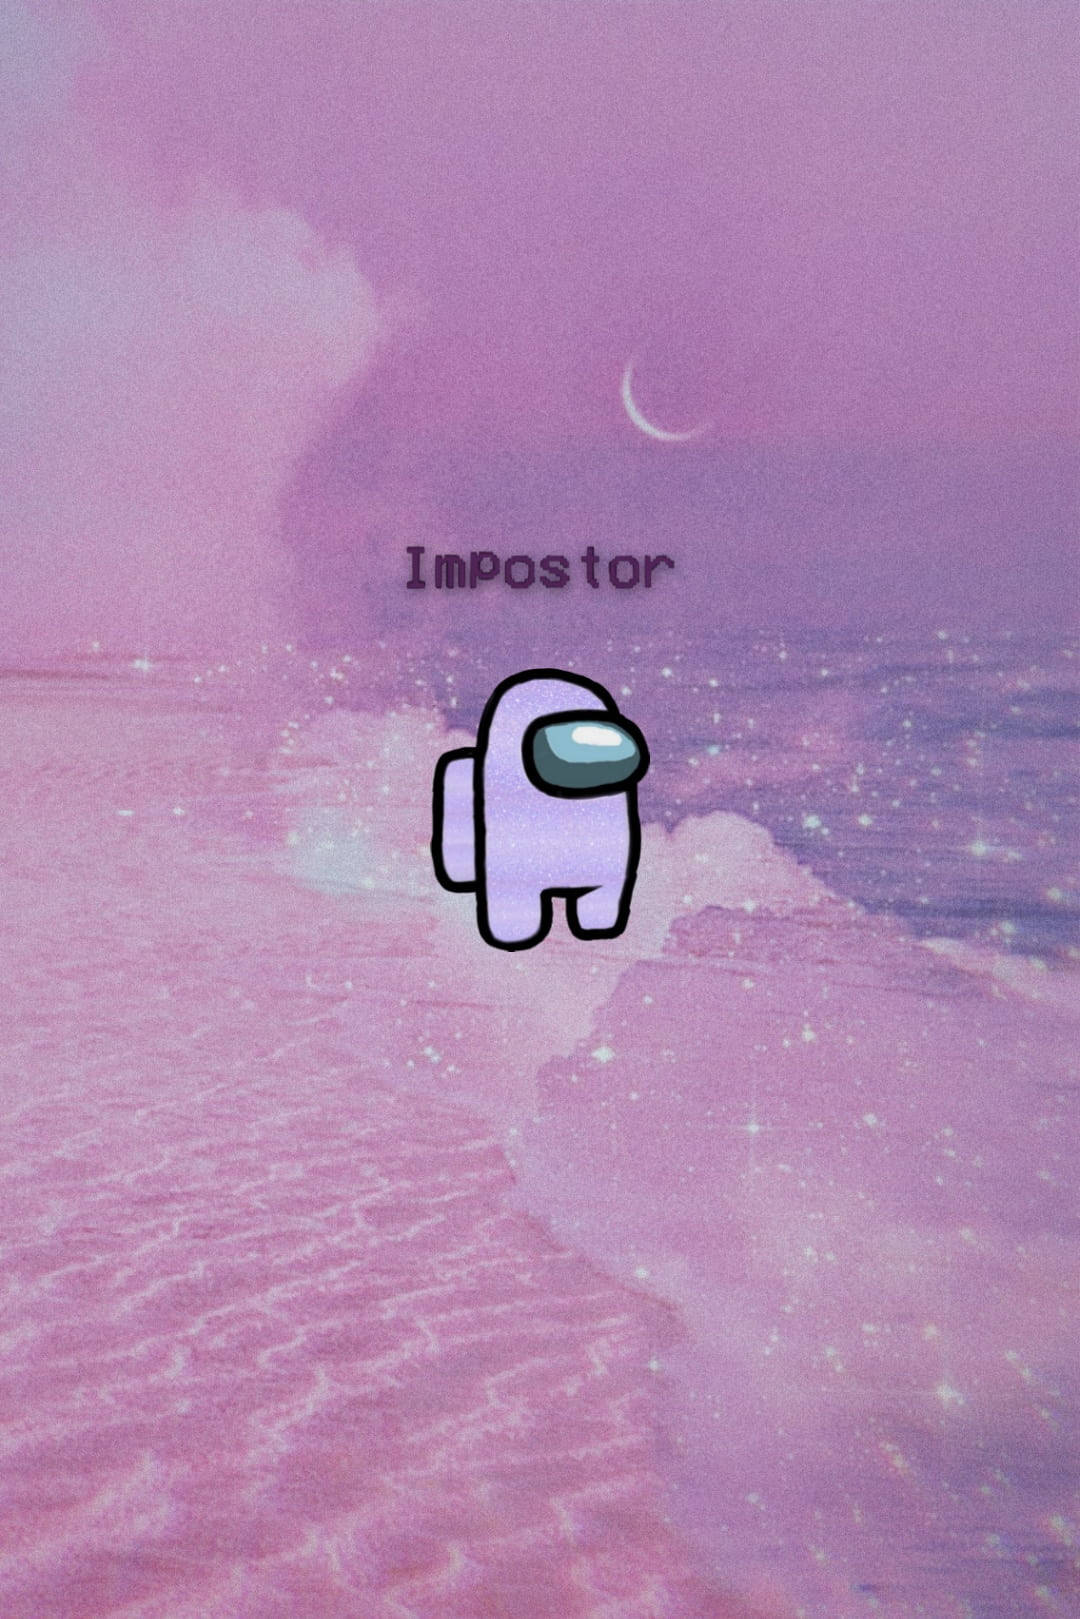 Sparkly Among Us Impostor Wallpaper